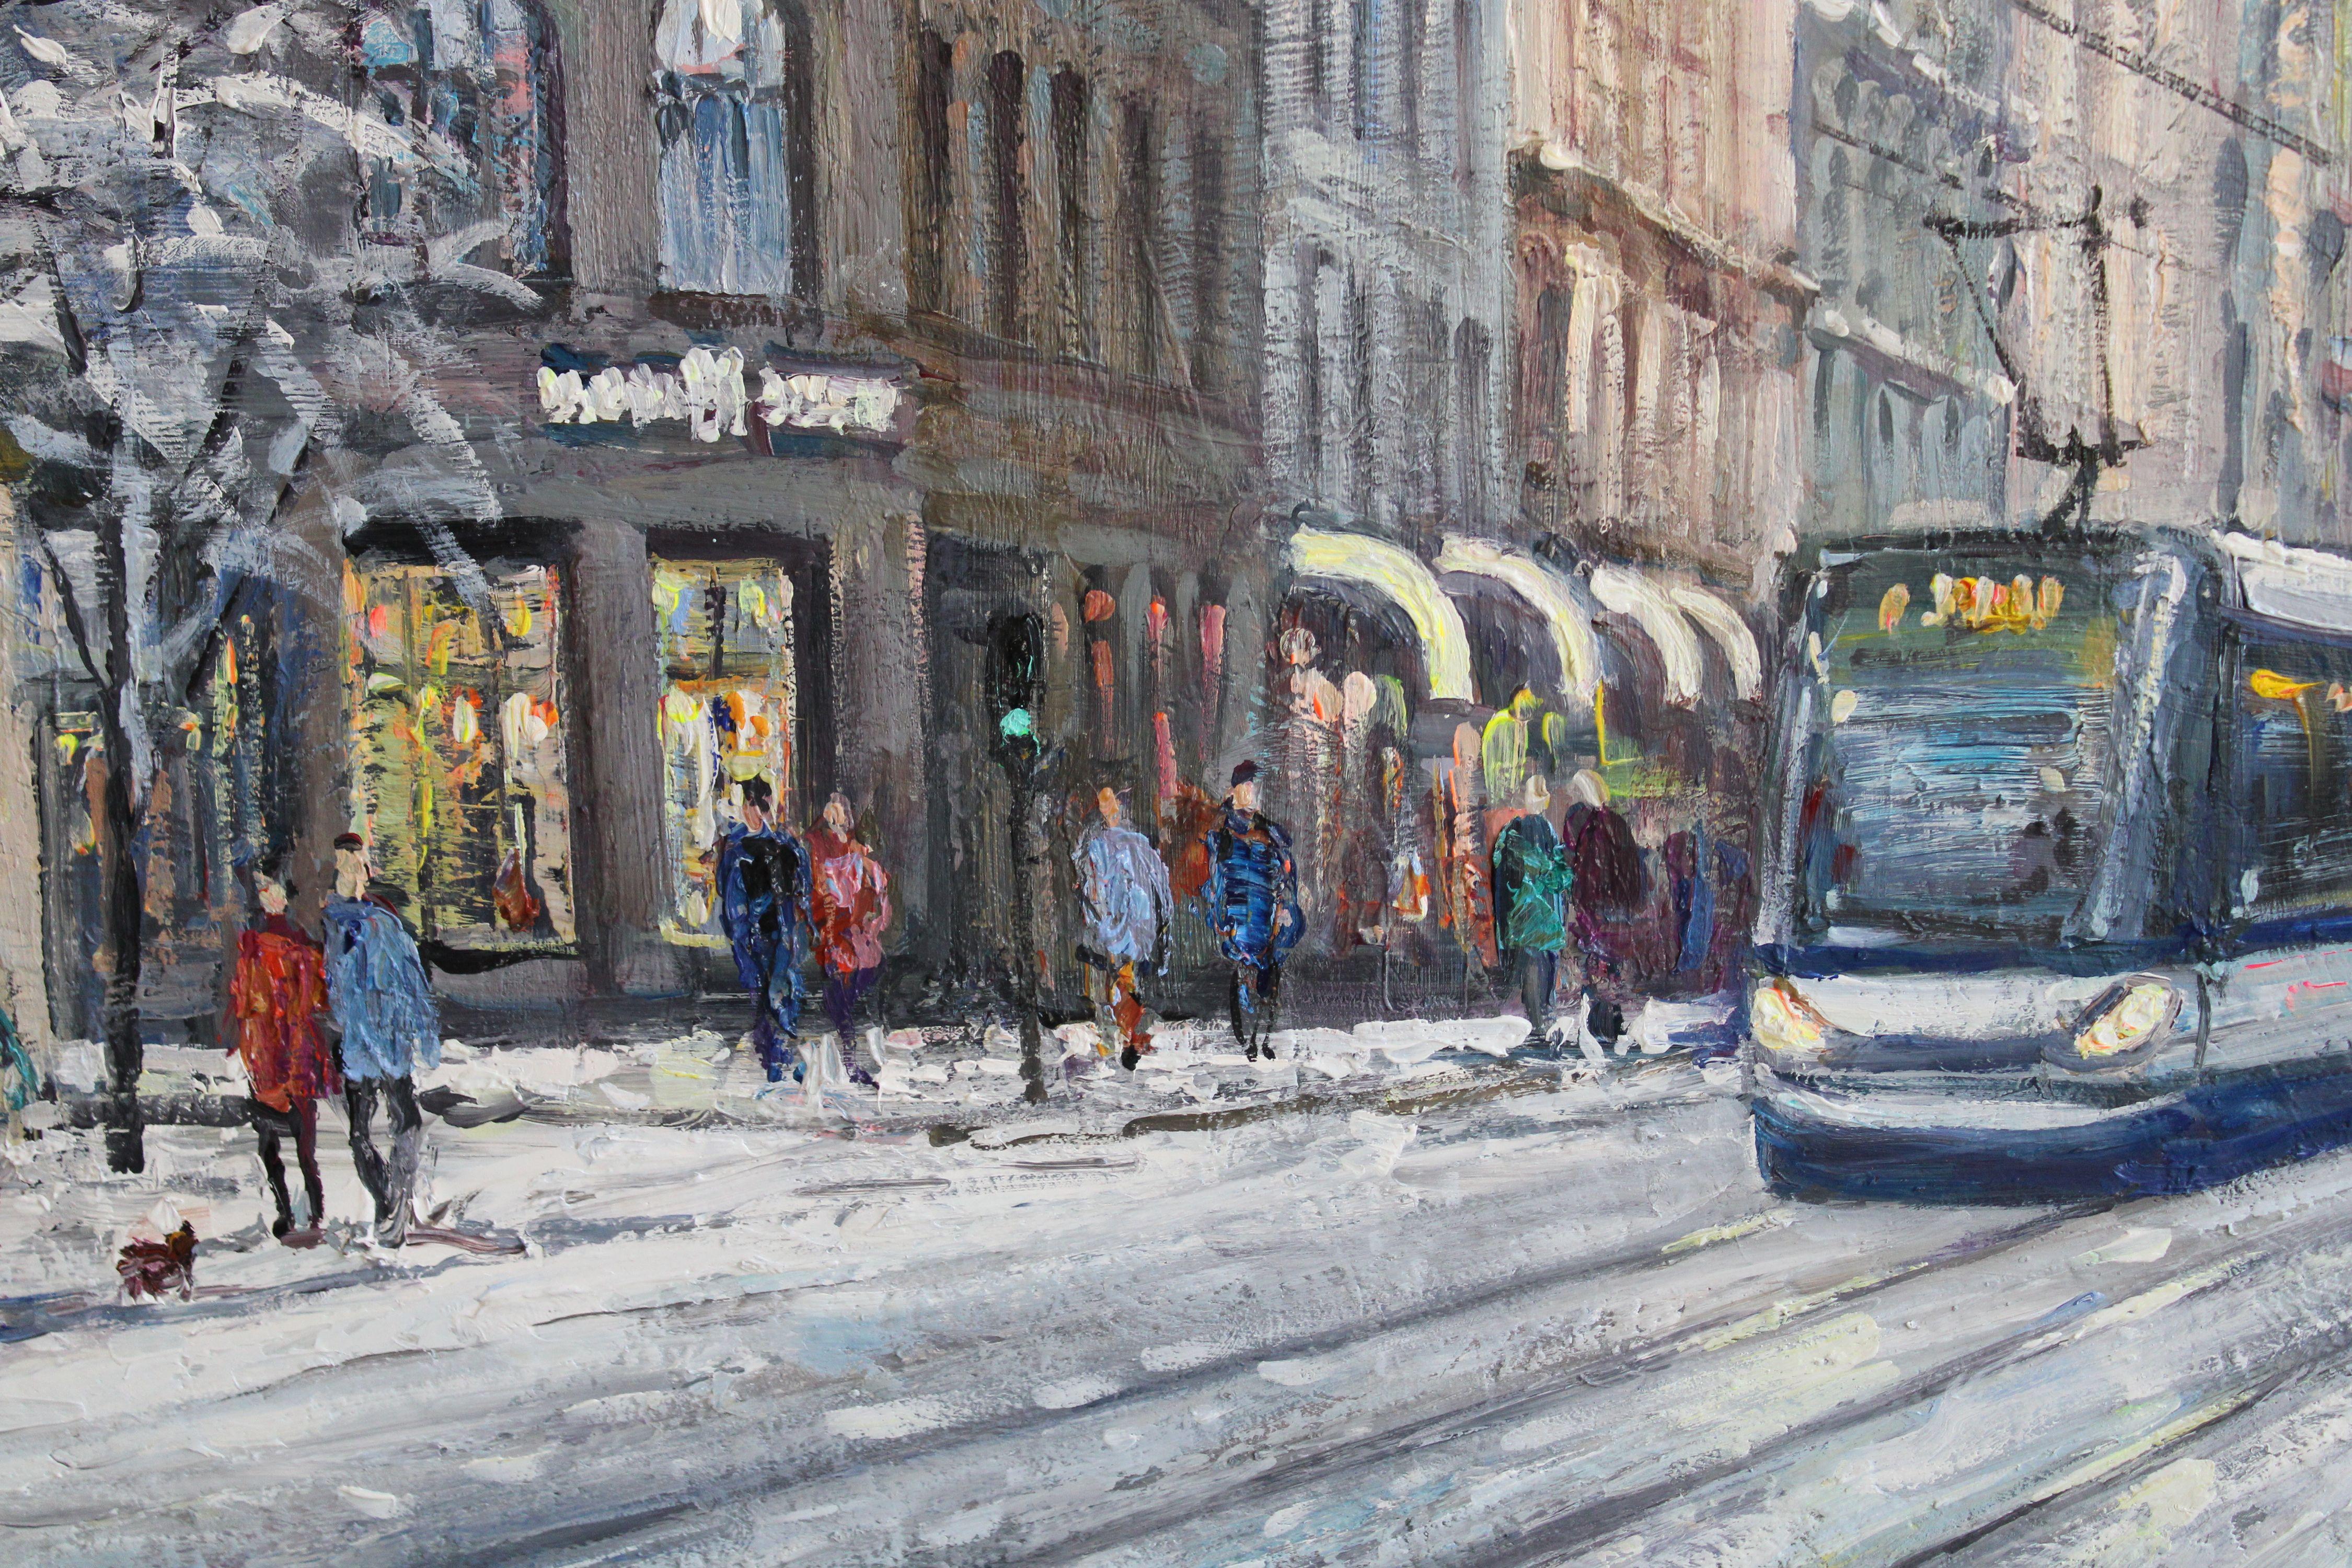 Winter on Barona Street. Oil on canvas, 73.5x85 cm
Rolands Krishjans (1966) 

In 1984 I finished J. Rozenthals art school in Riga.
In 1993 I graduated from Latvian Art Academy with degree in monumental and decorative painting under the management of